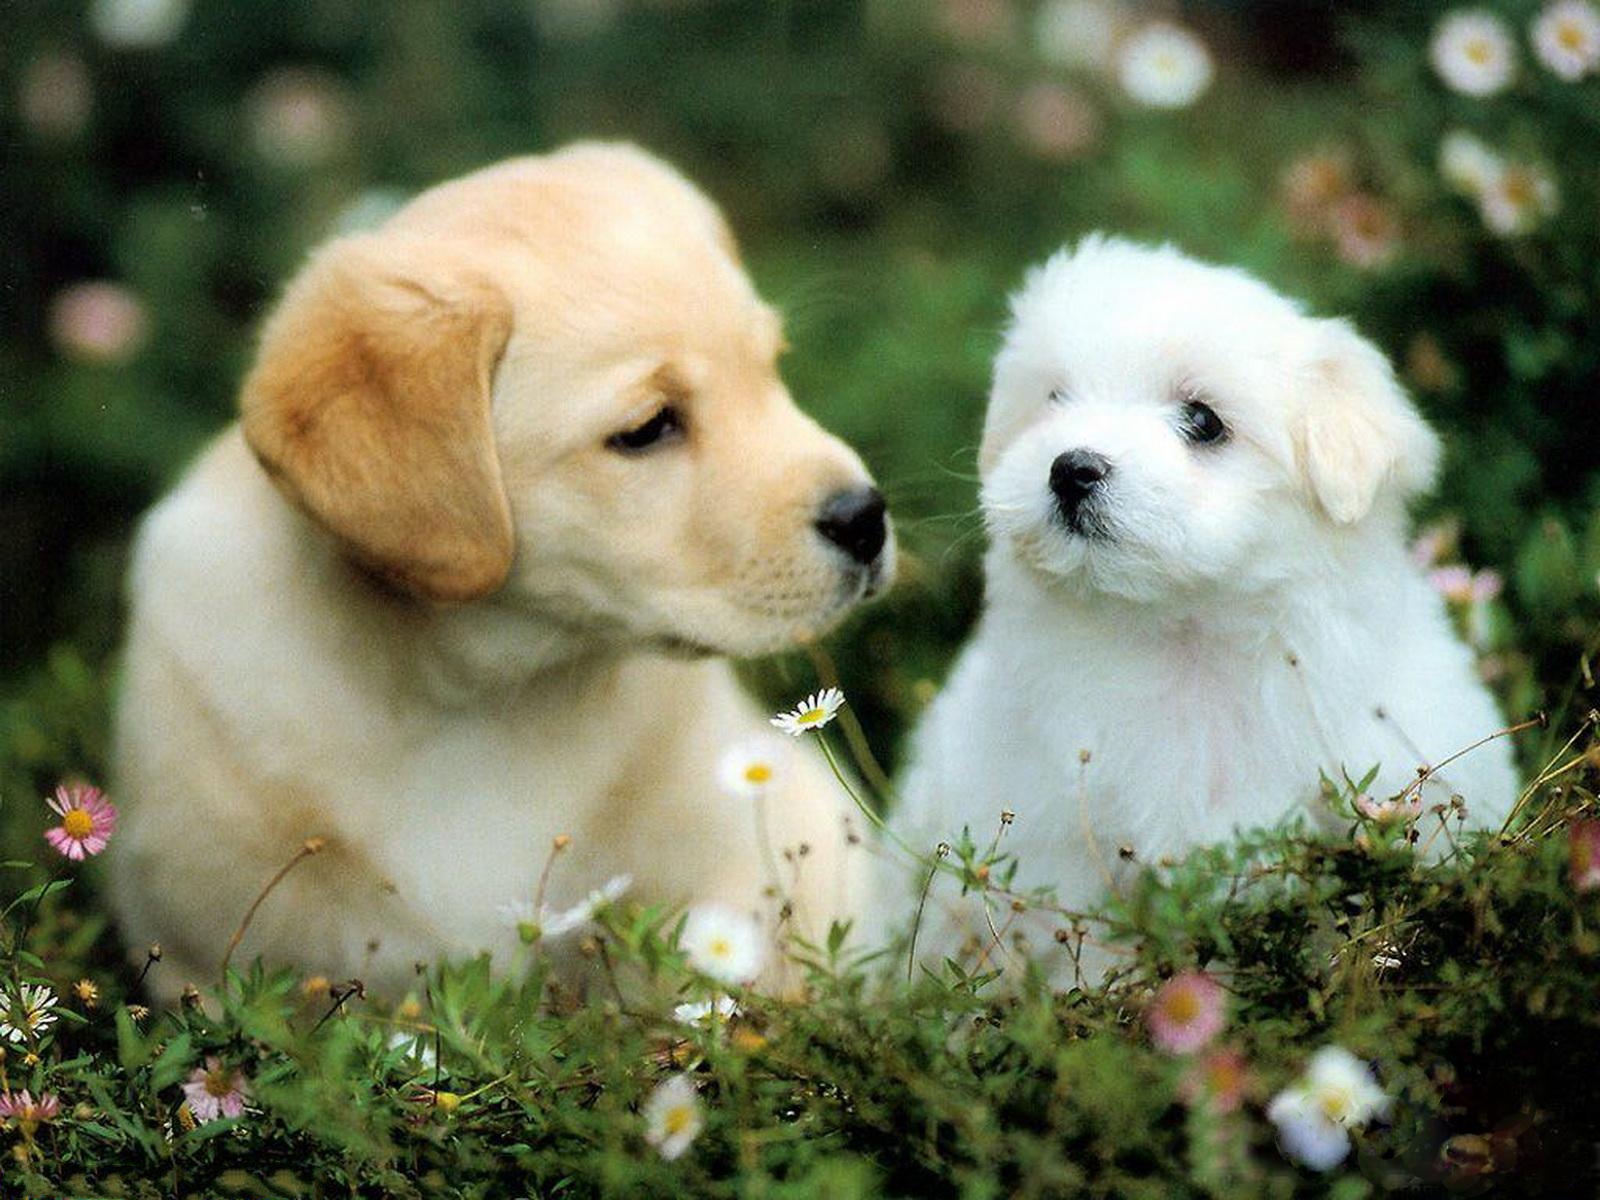 Two puppies in a meadow